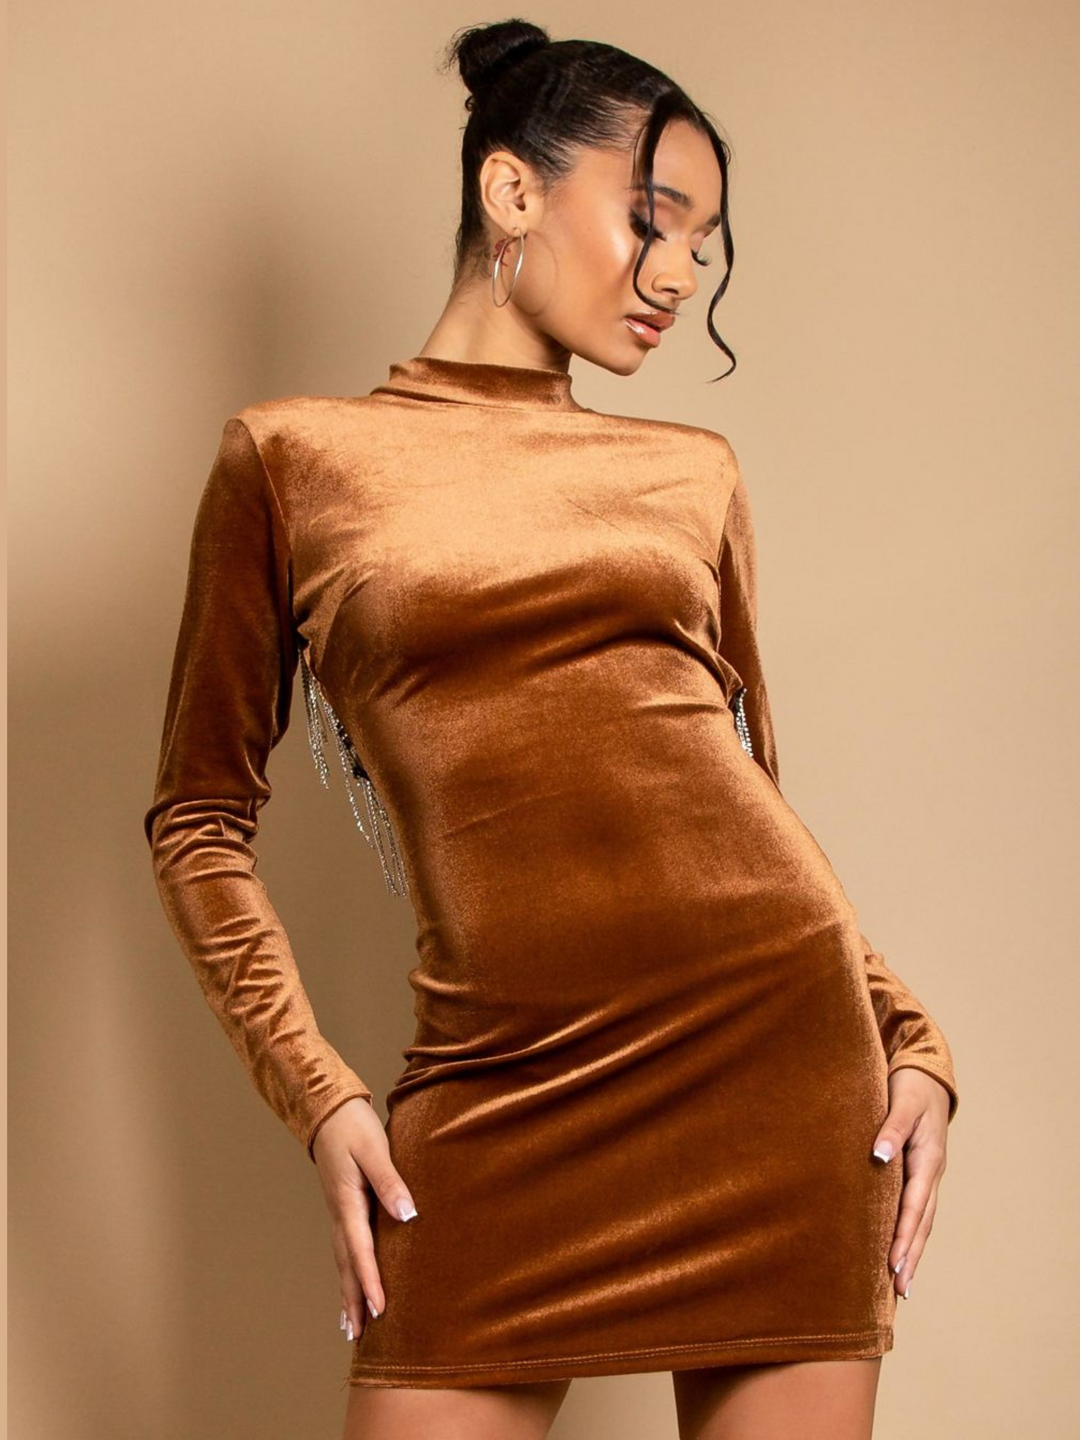 Model wears a velvet mini dress in a tanned colour. The mini dress has a bodycon fit and velvet elastic, with a mock neck, long sleeves and a cut out back with diamante trim.  Model faces fprward and looks away from the camera.